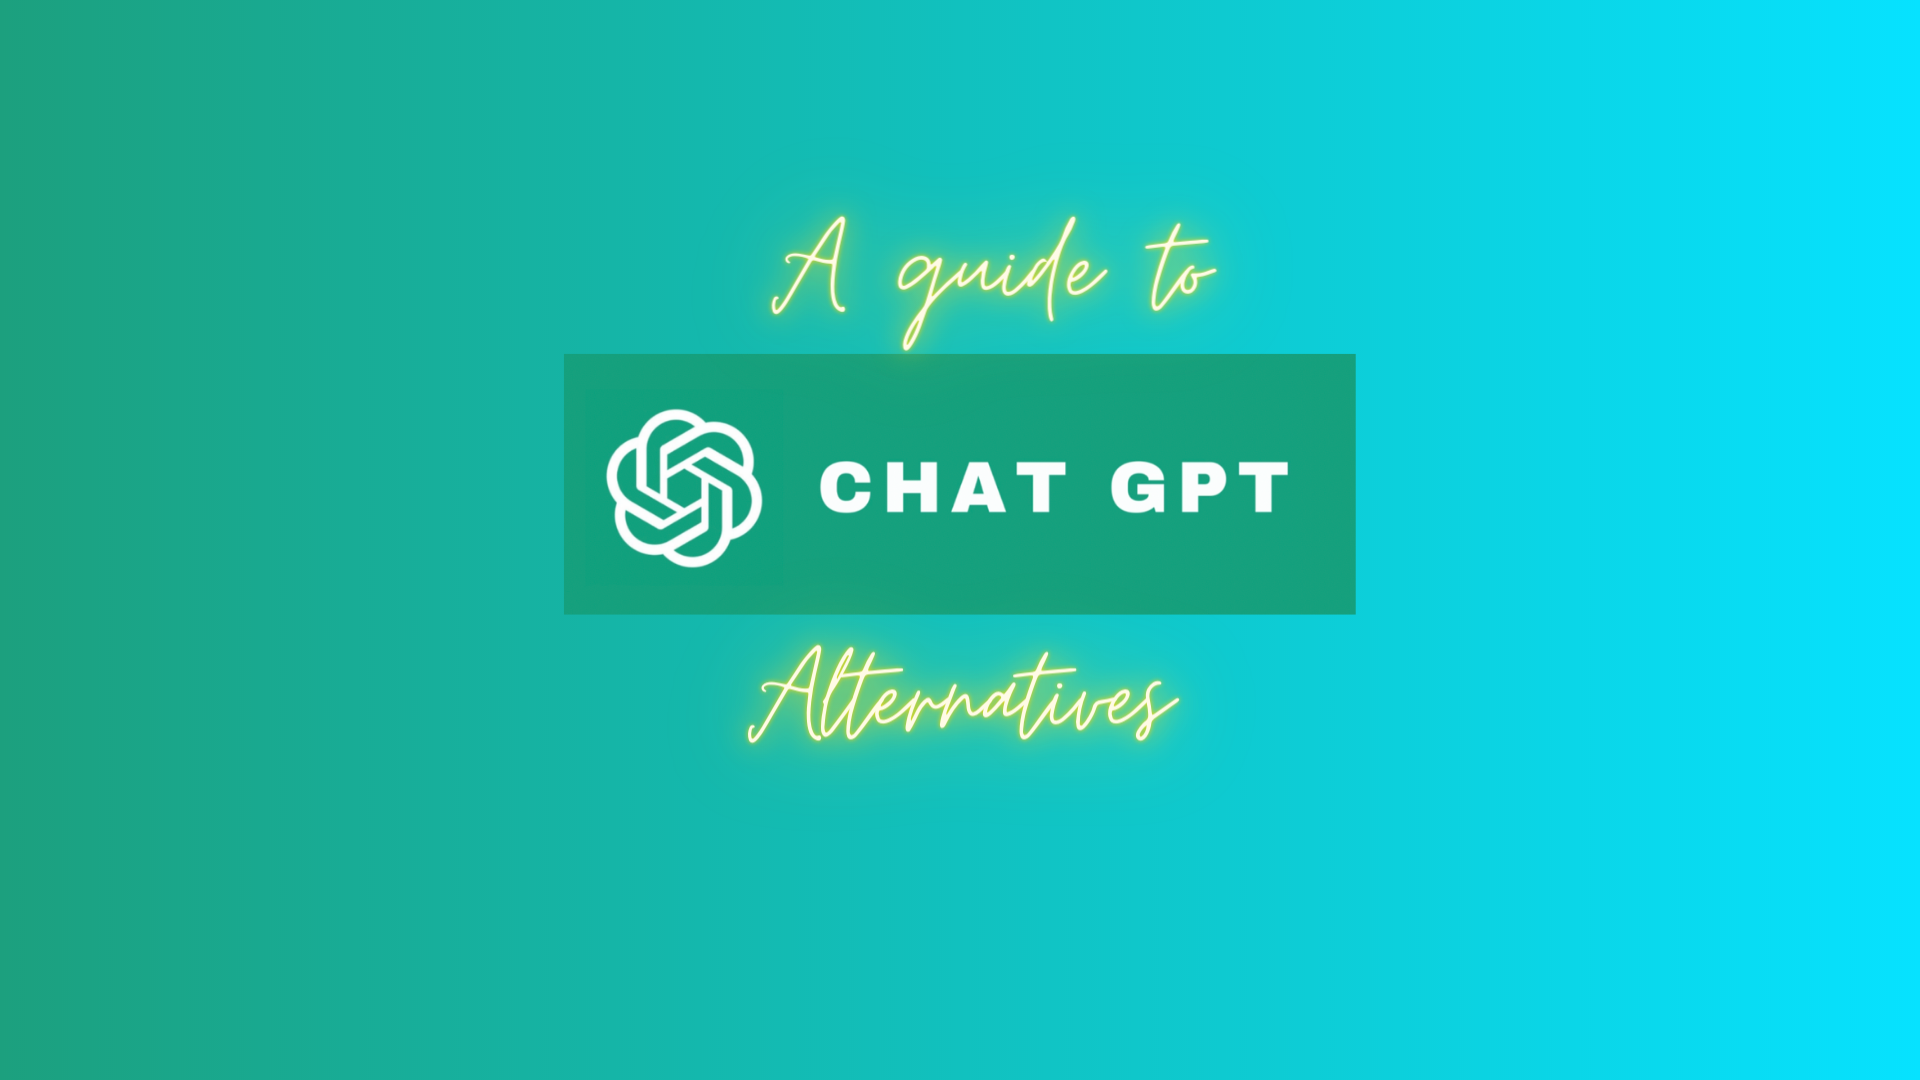 A guide to ChatGPT alternatives on a green and turquoise background.